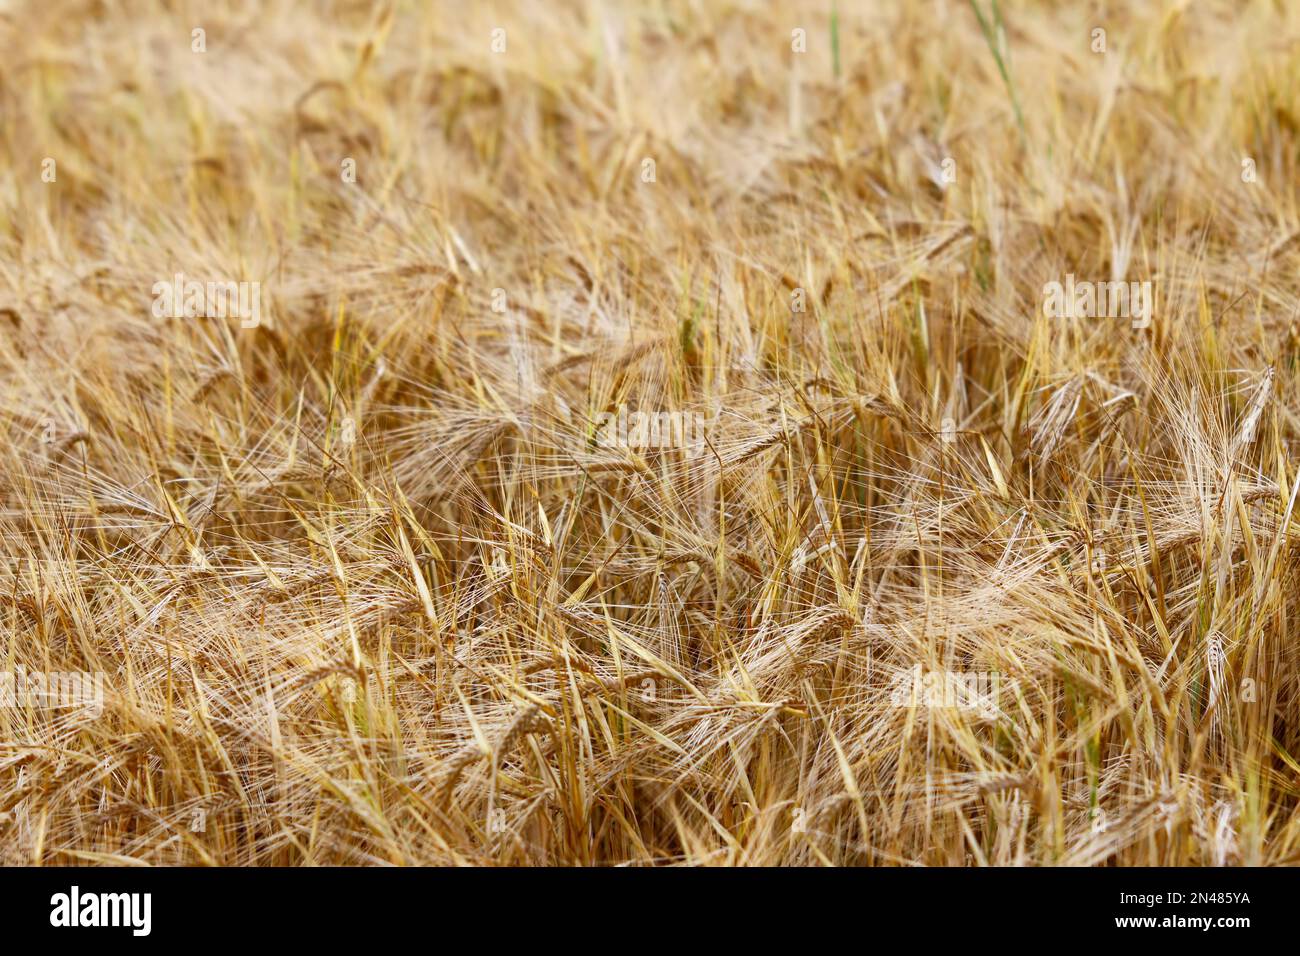 Ripe ears of barley in the field - barley is one of the most economically important plants Stock Photo